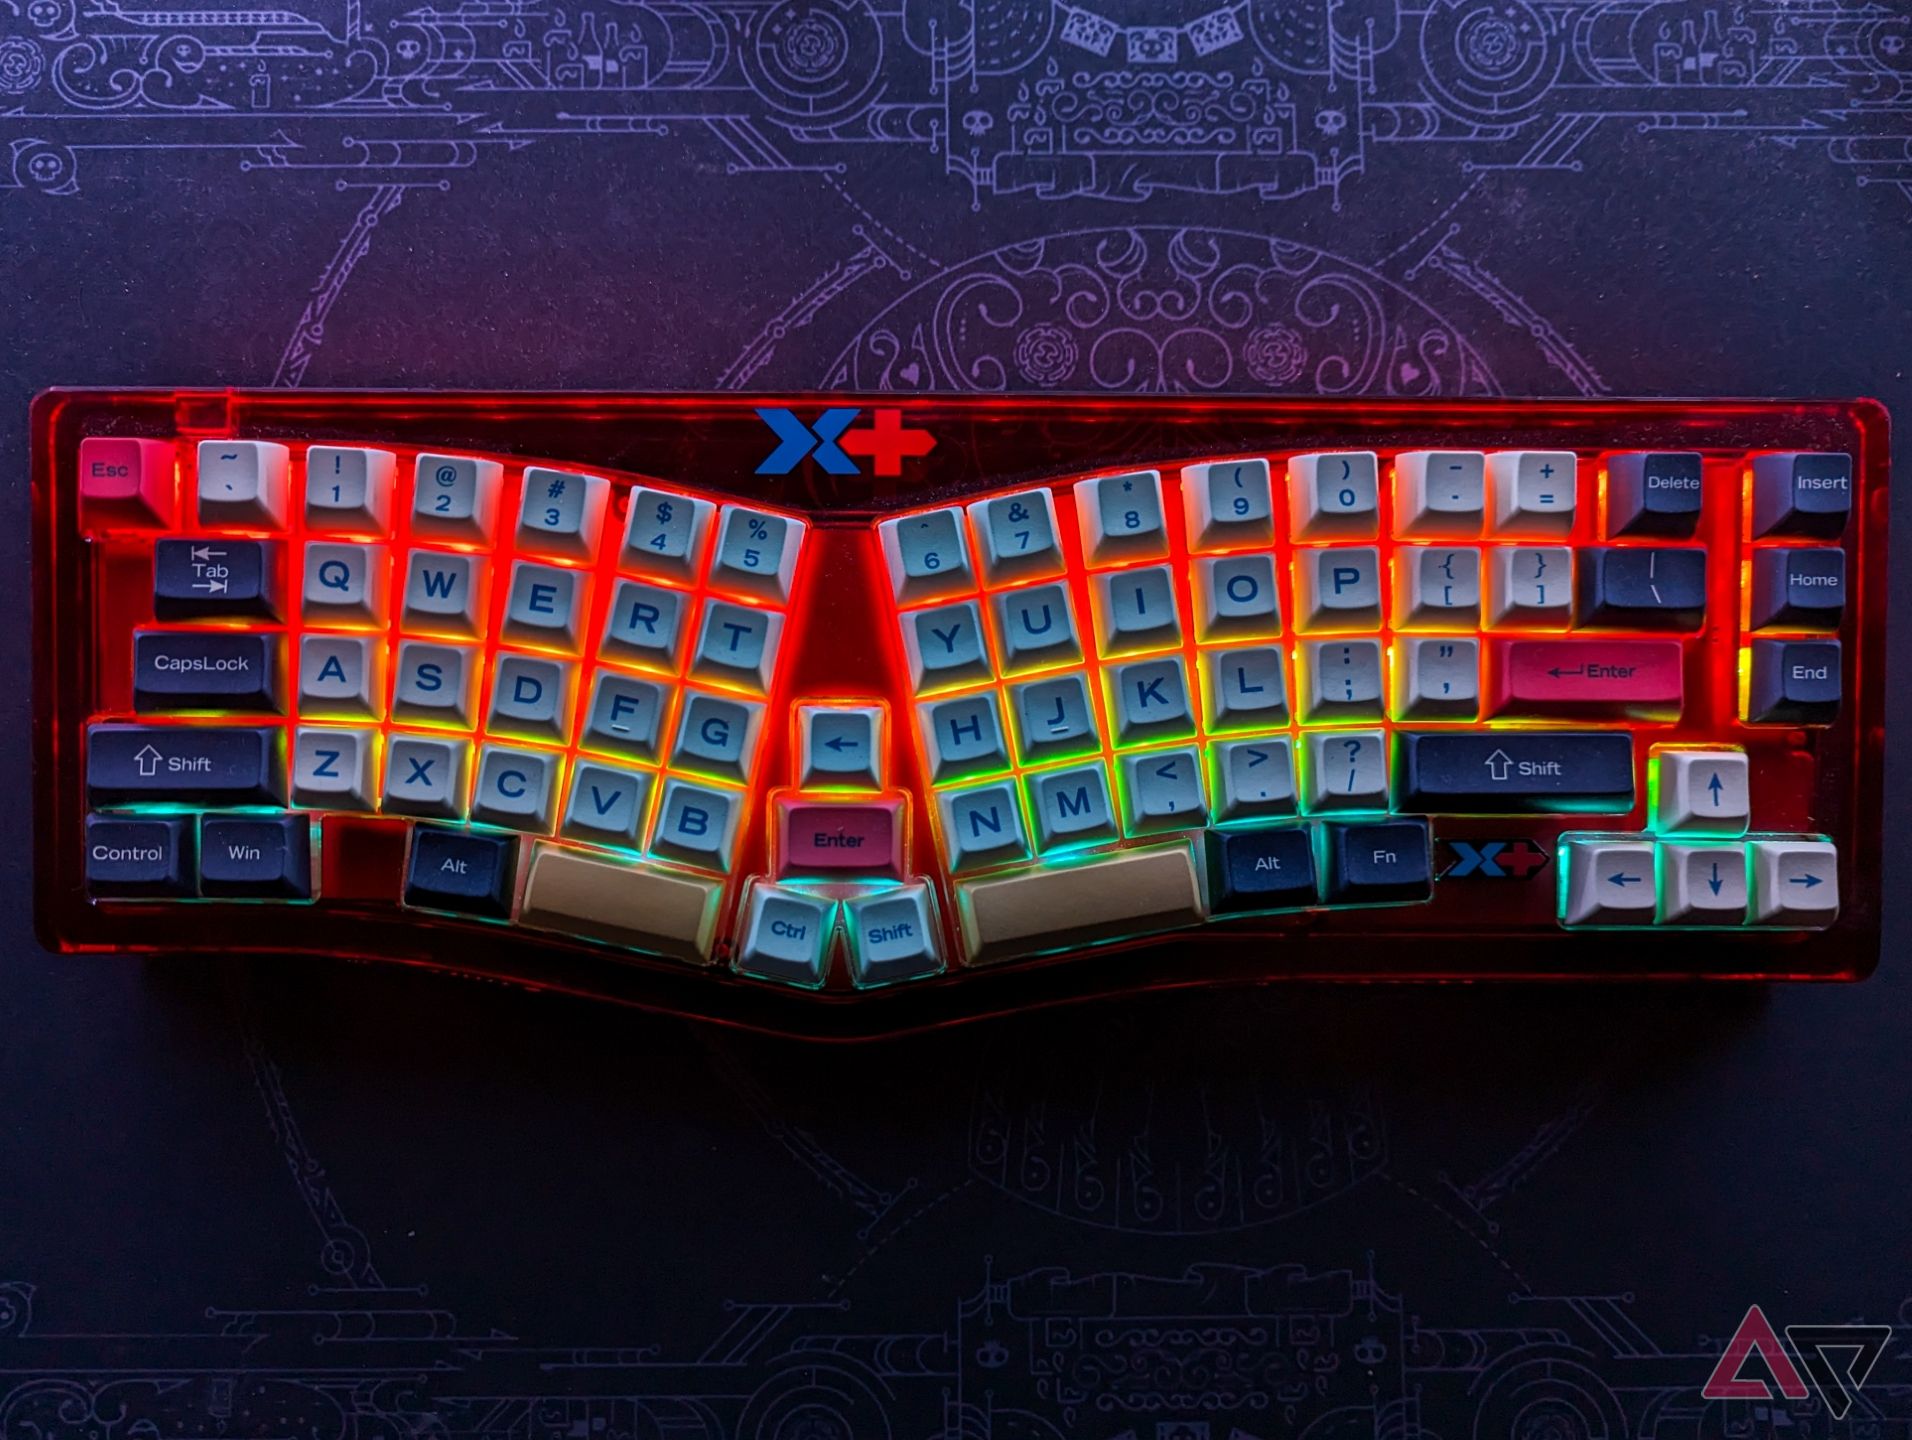 A red Alice layout mechanical keyboard with RGB backlighting on a dimly lit black deskmat